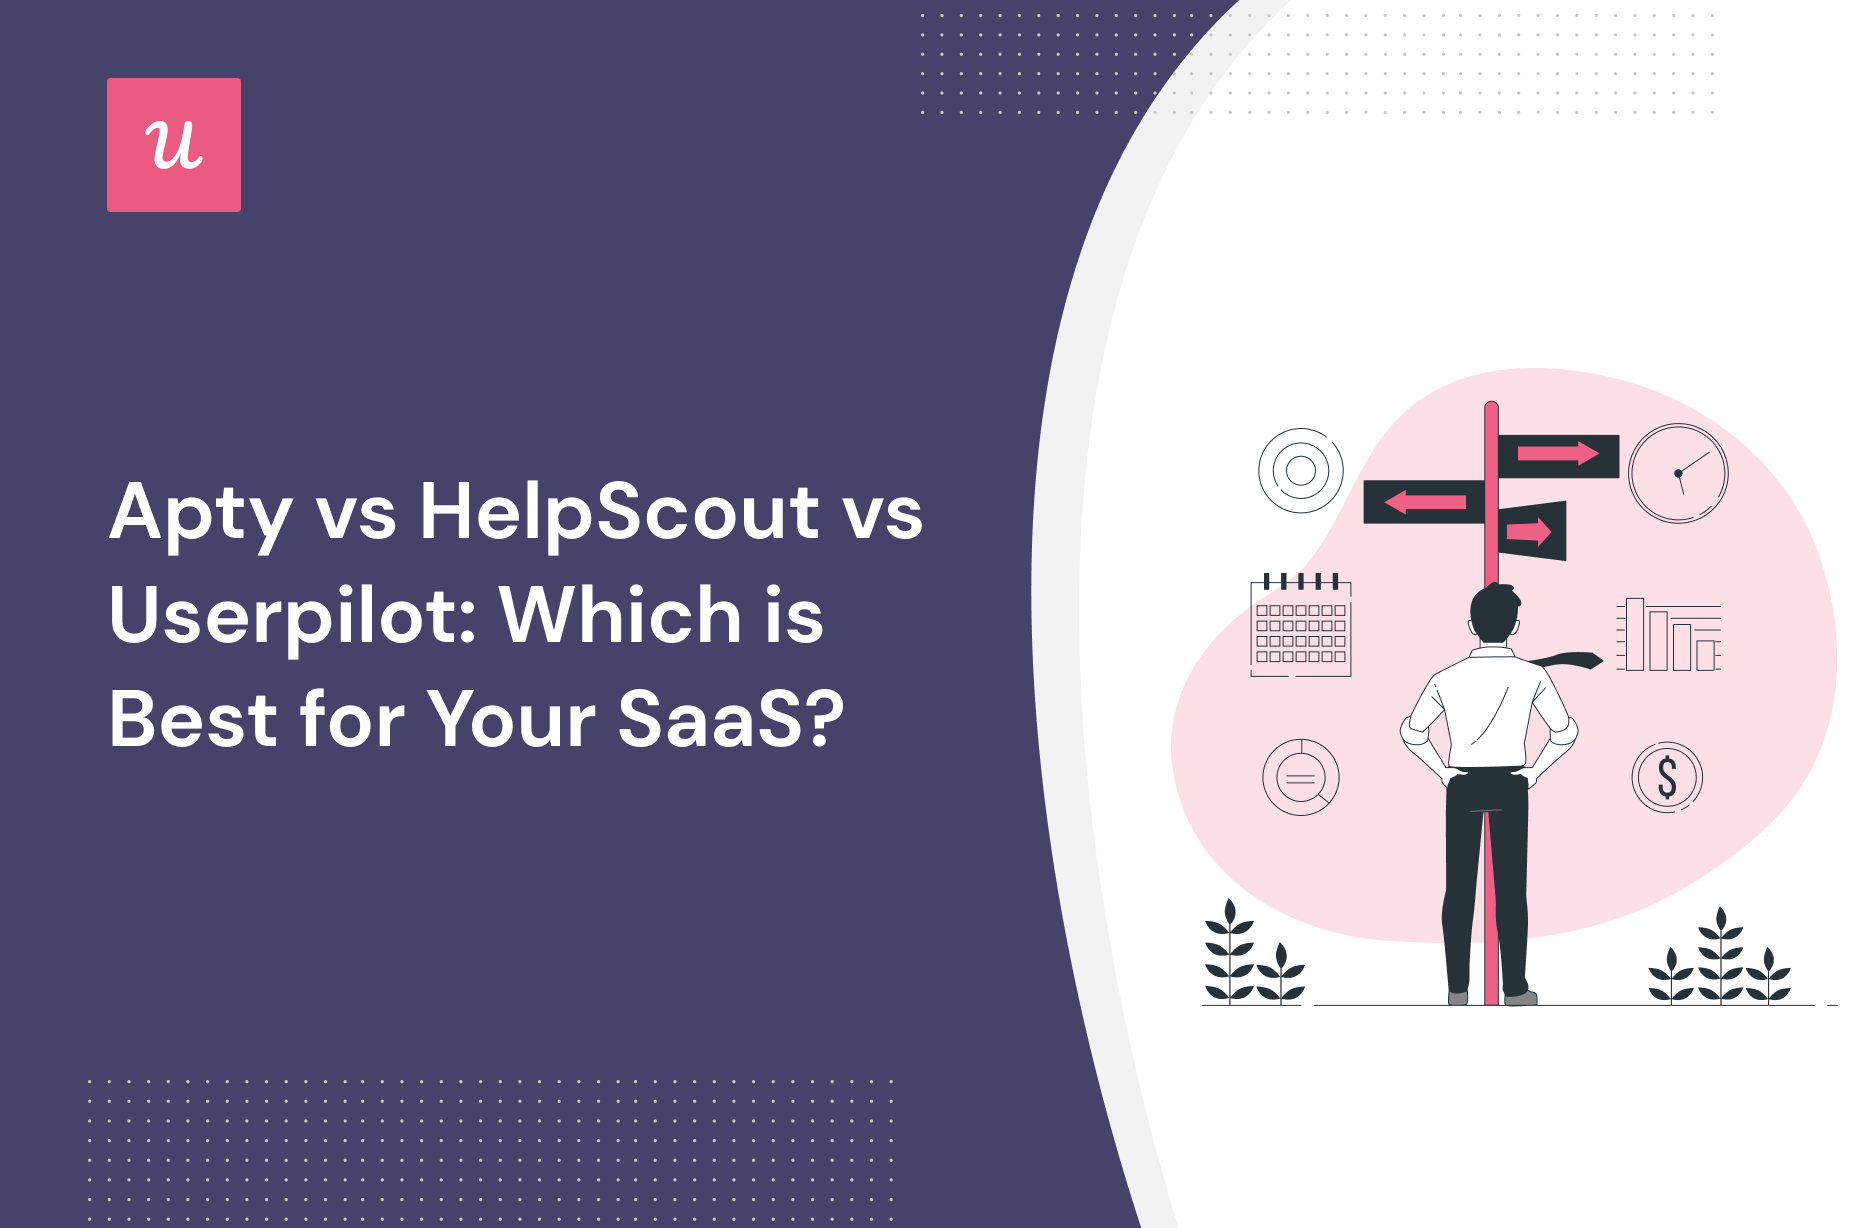 Apty vs HelpScout vs Userpilot: Which is Best for Your SaaS?